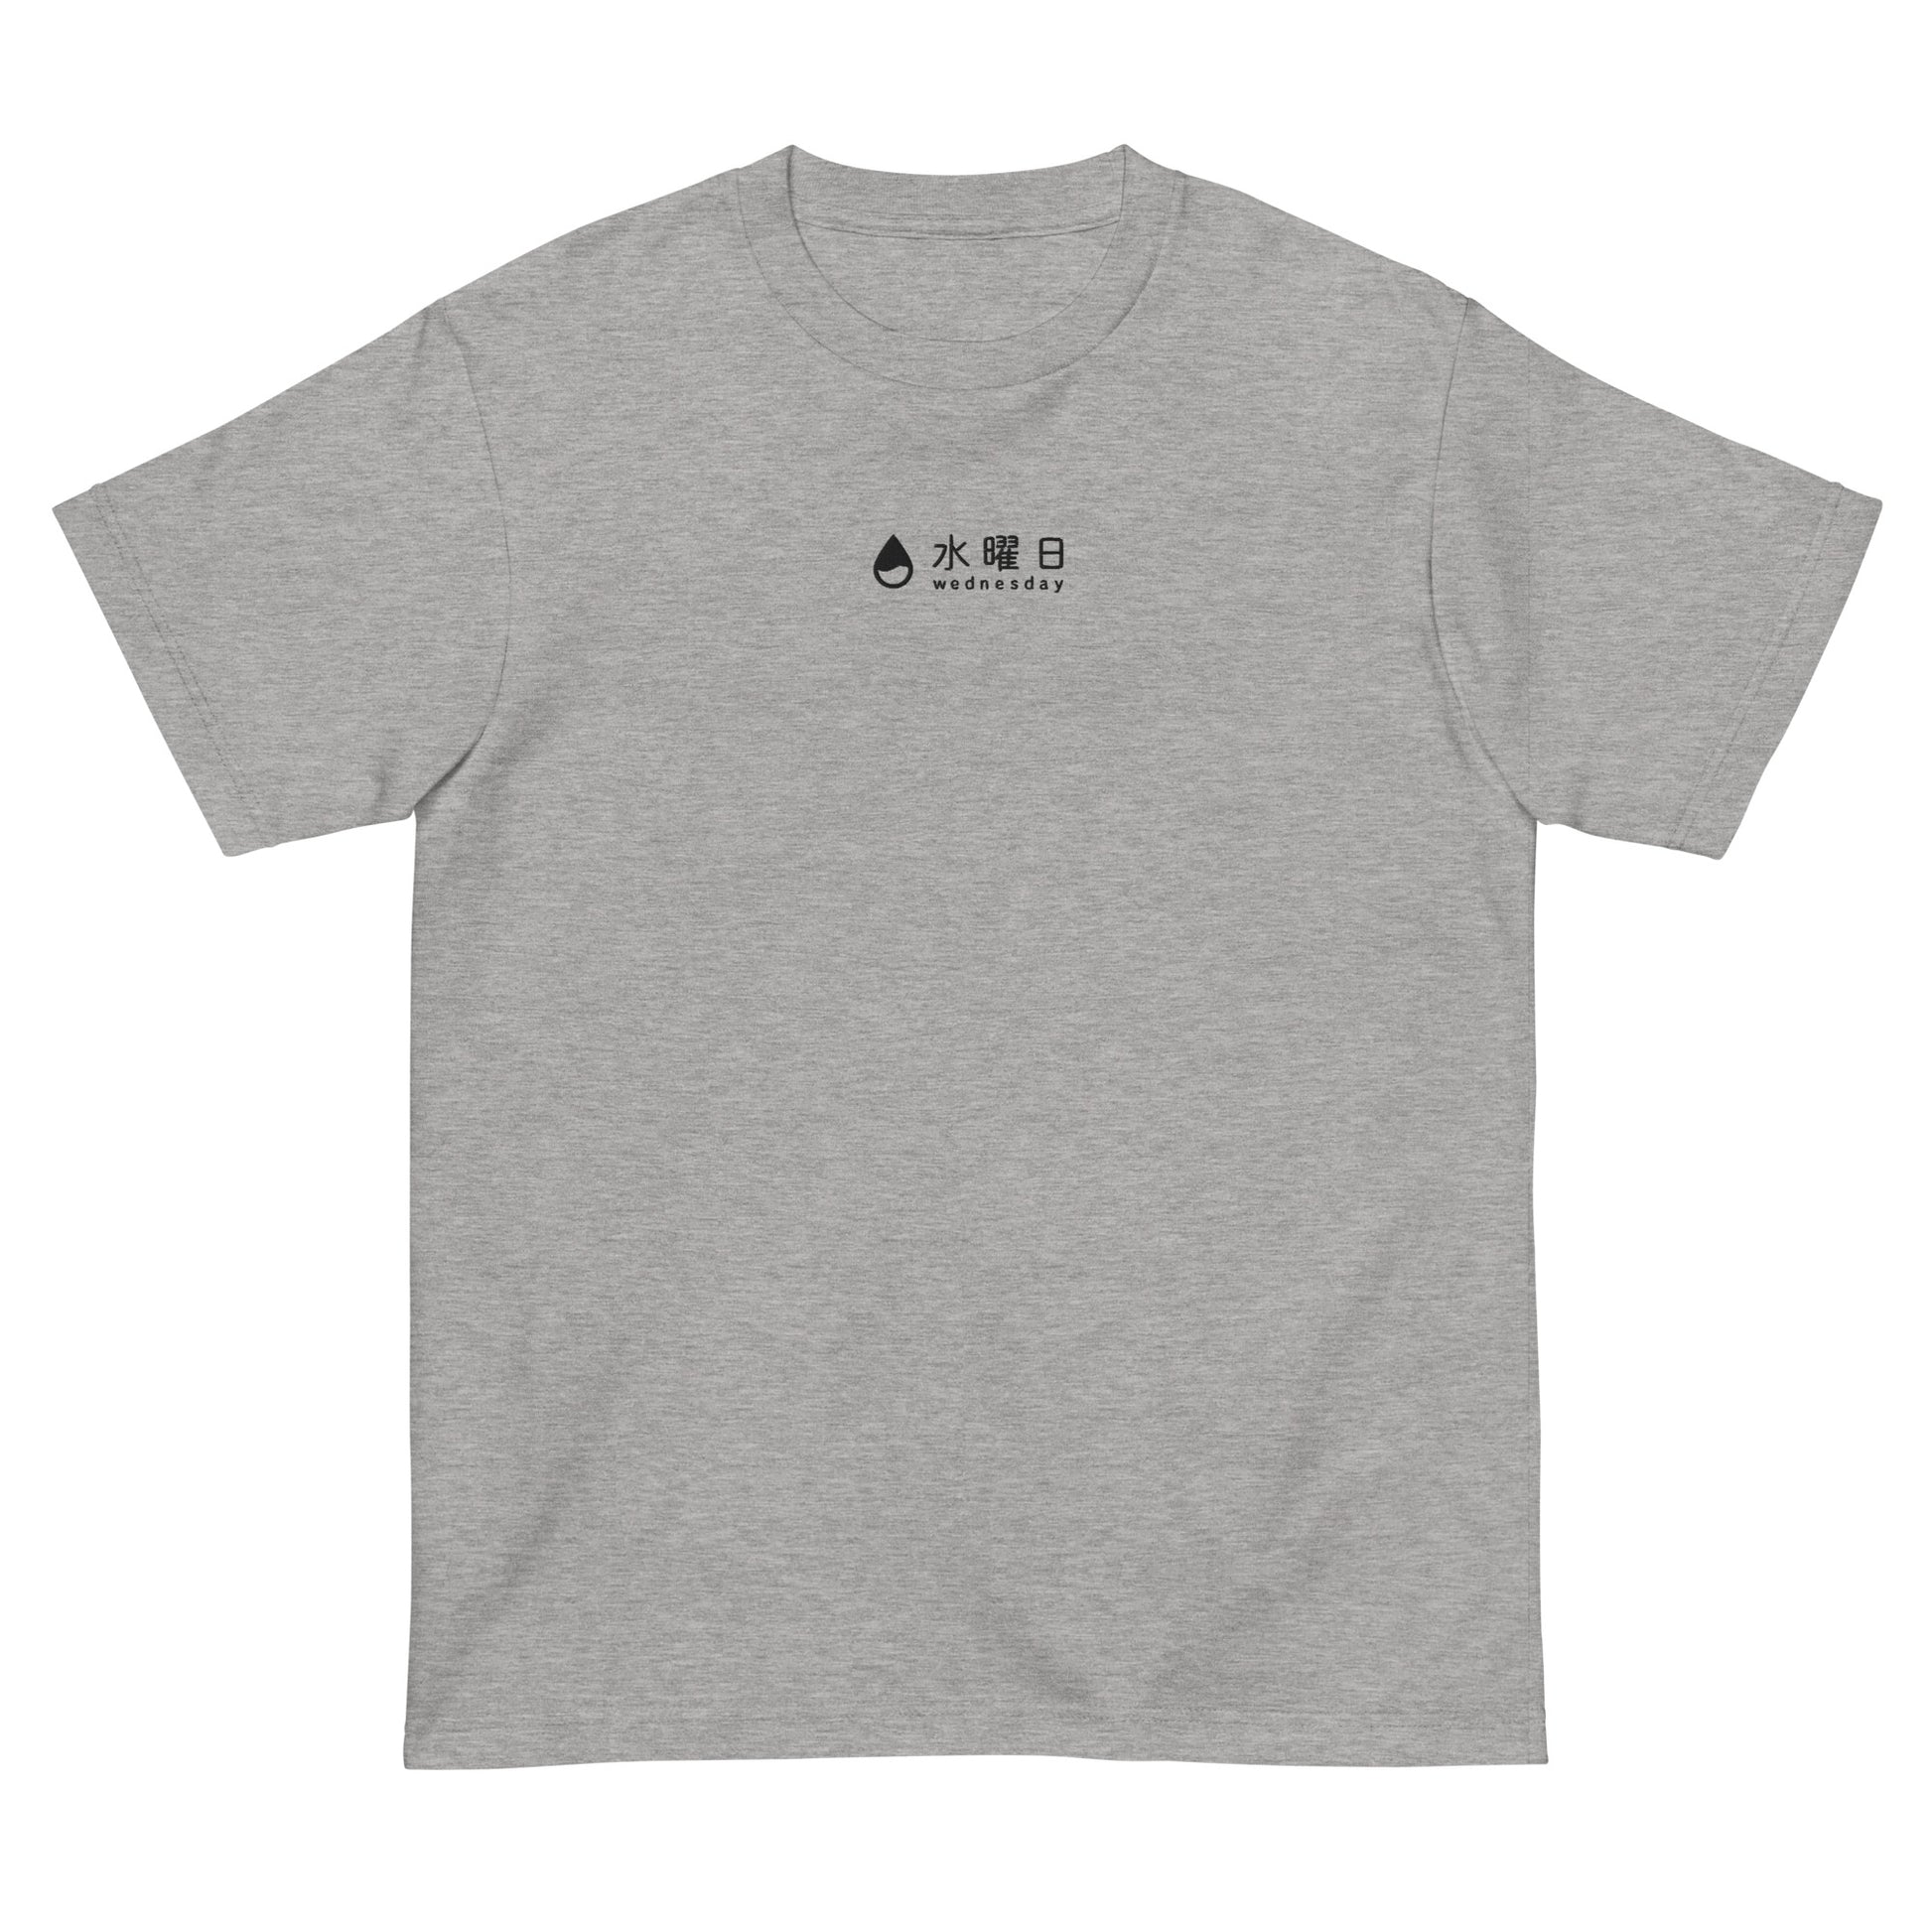 Light Gray High Quality Tee - Front Design with a white Embroidery "Wednesday" in Japanese and English